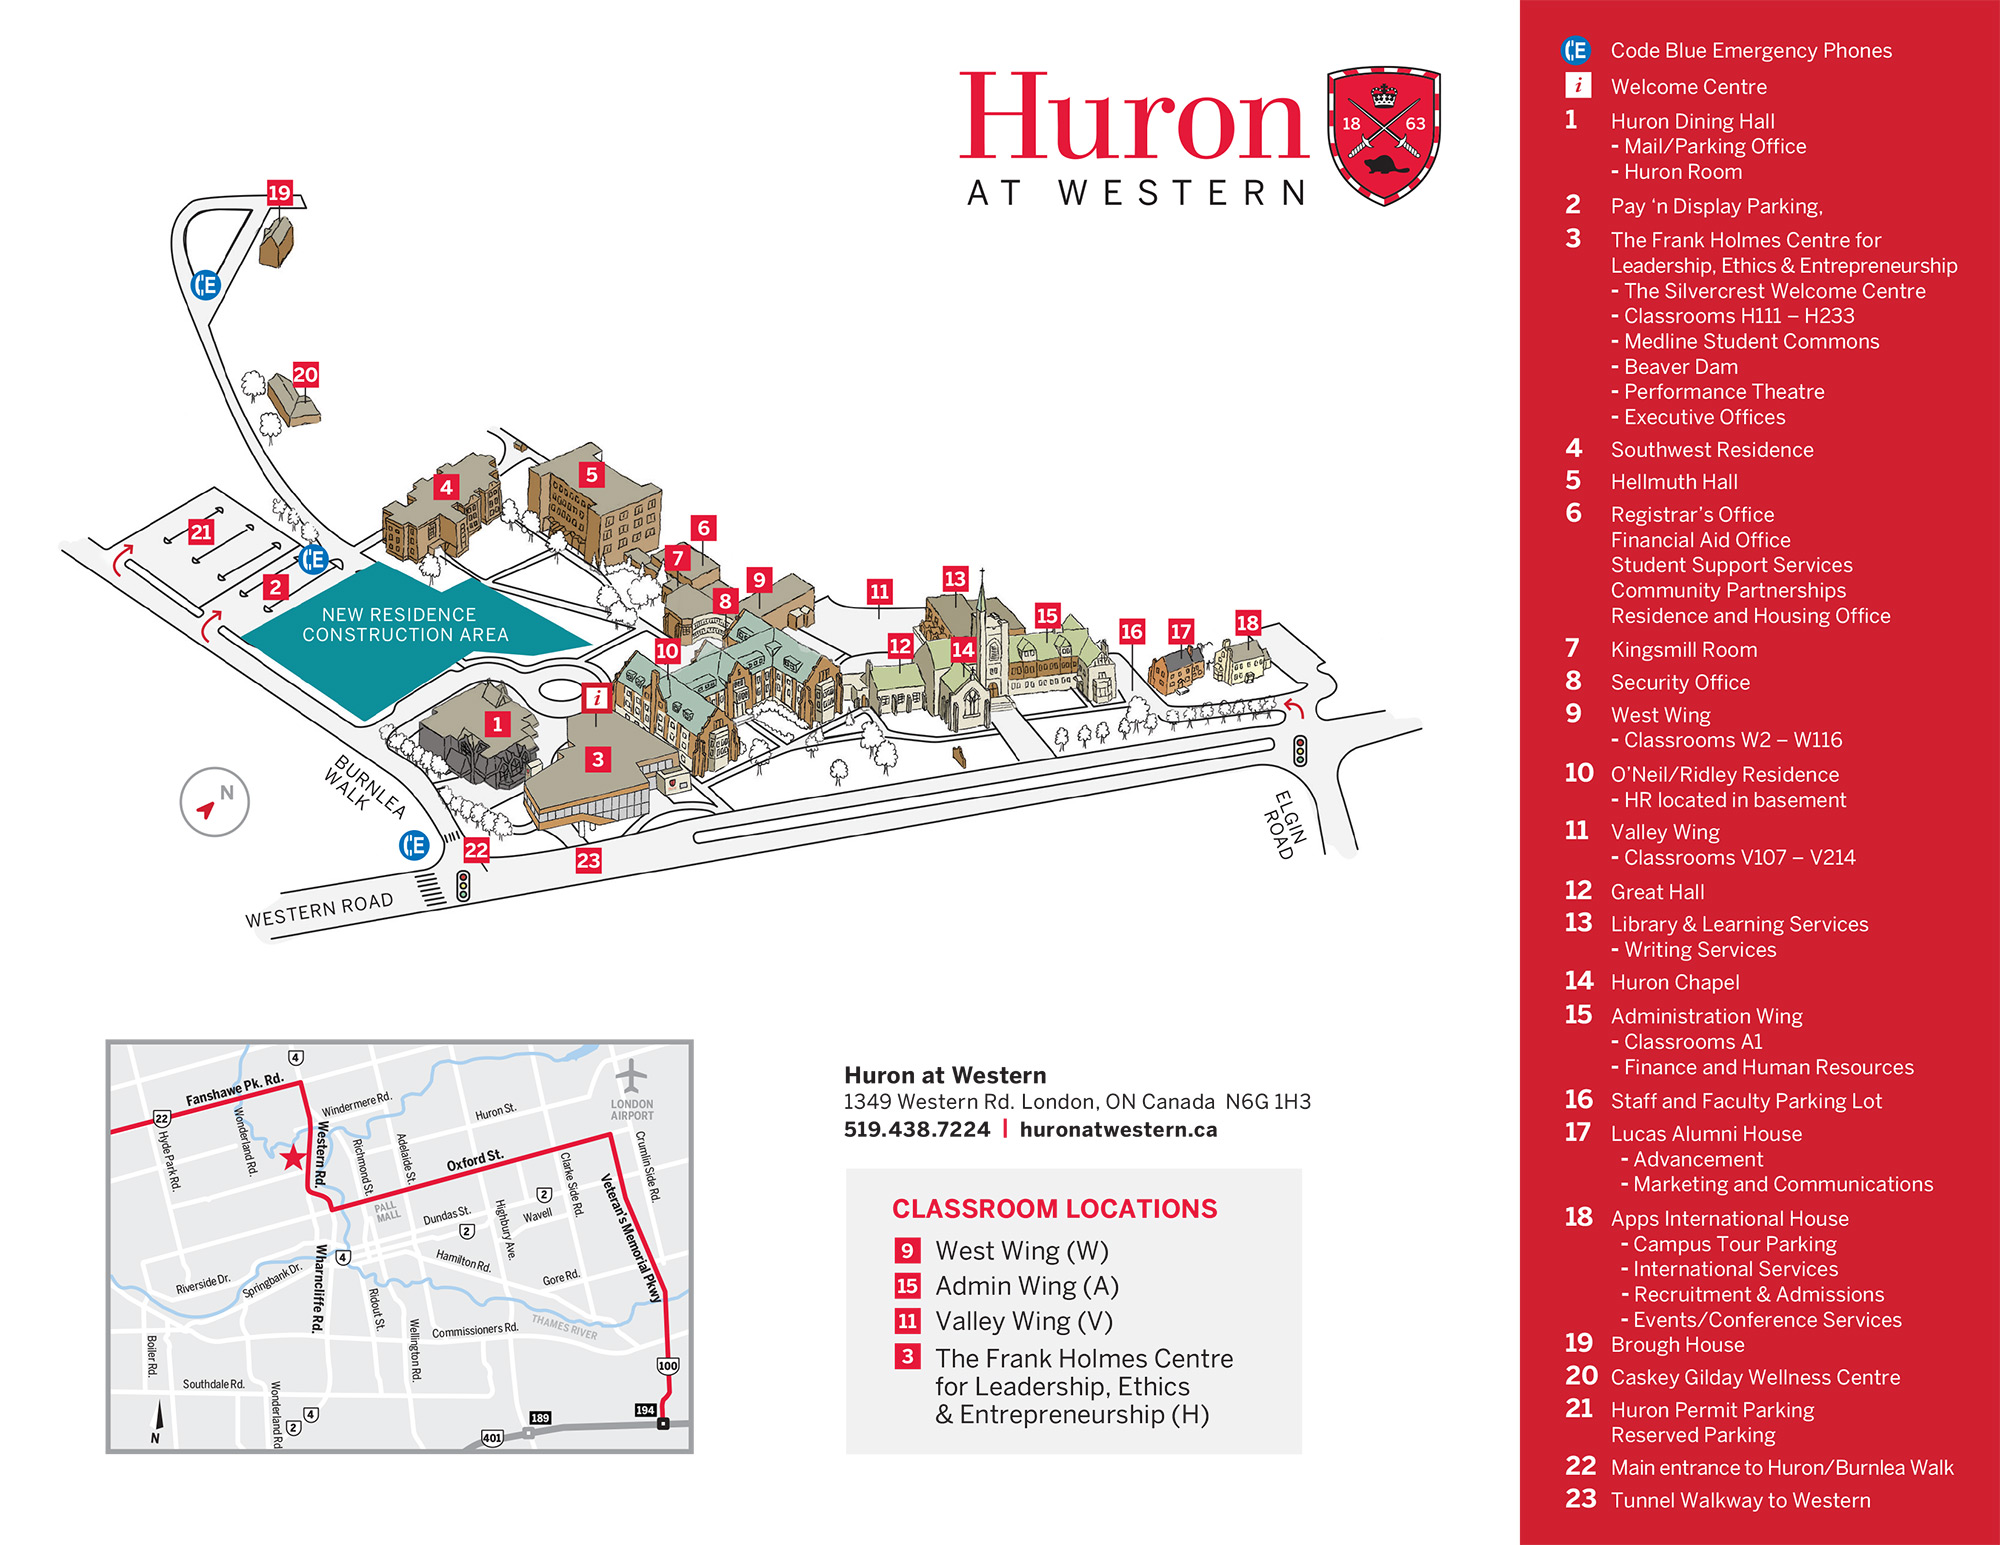 Map of Huron Campus